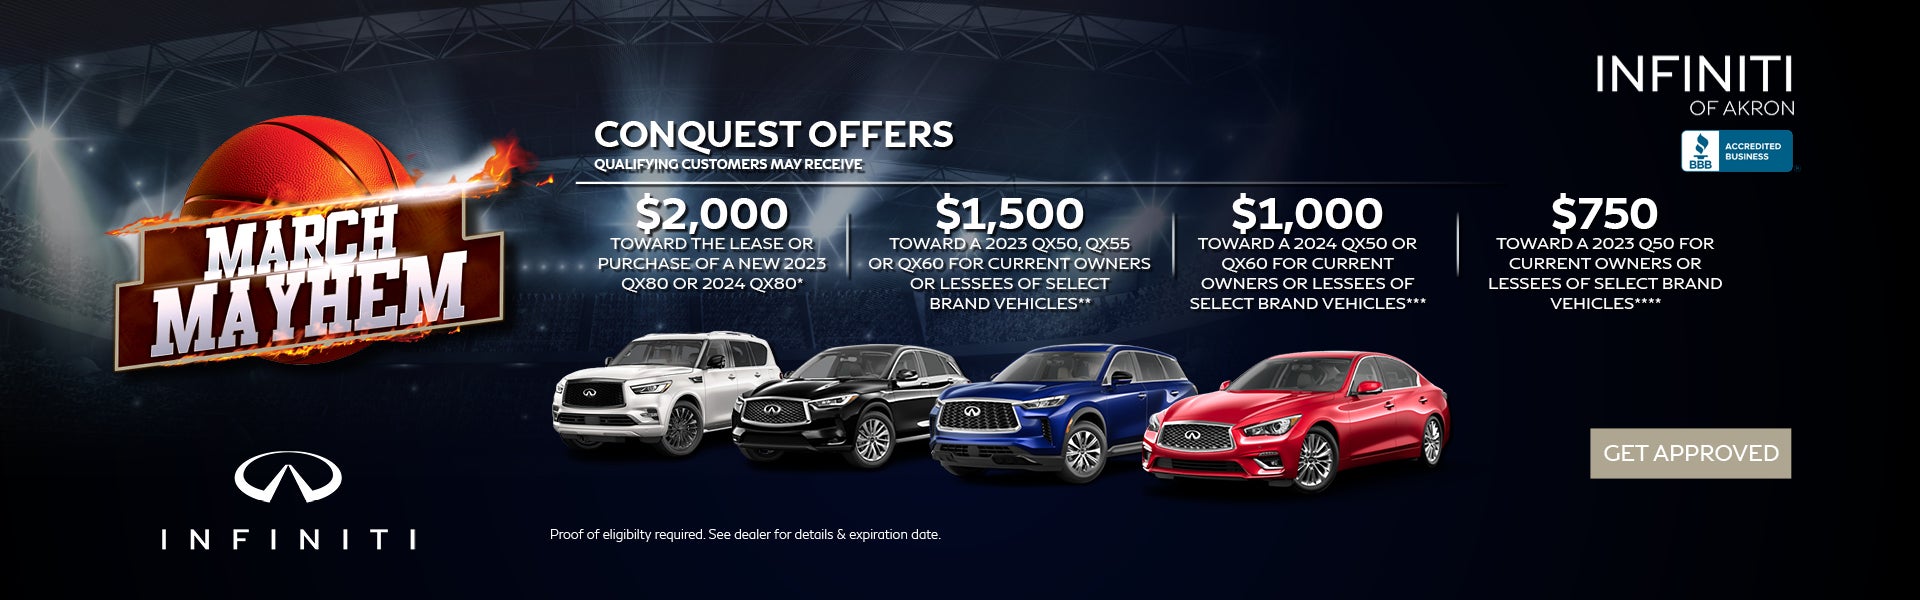 Conquest Offers